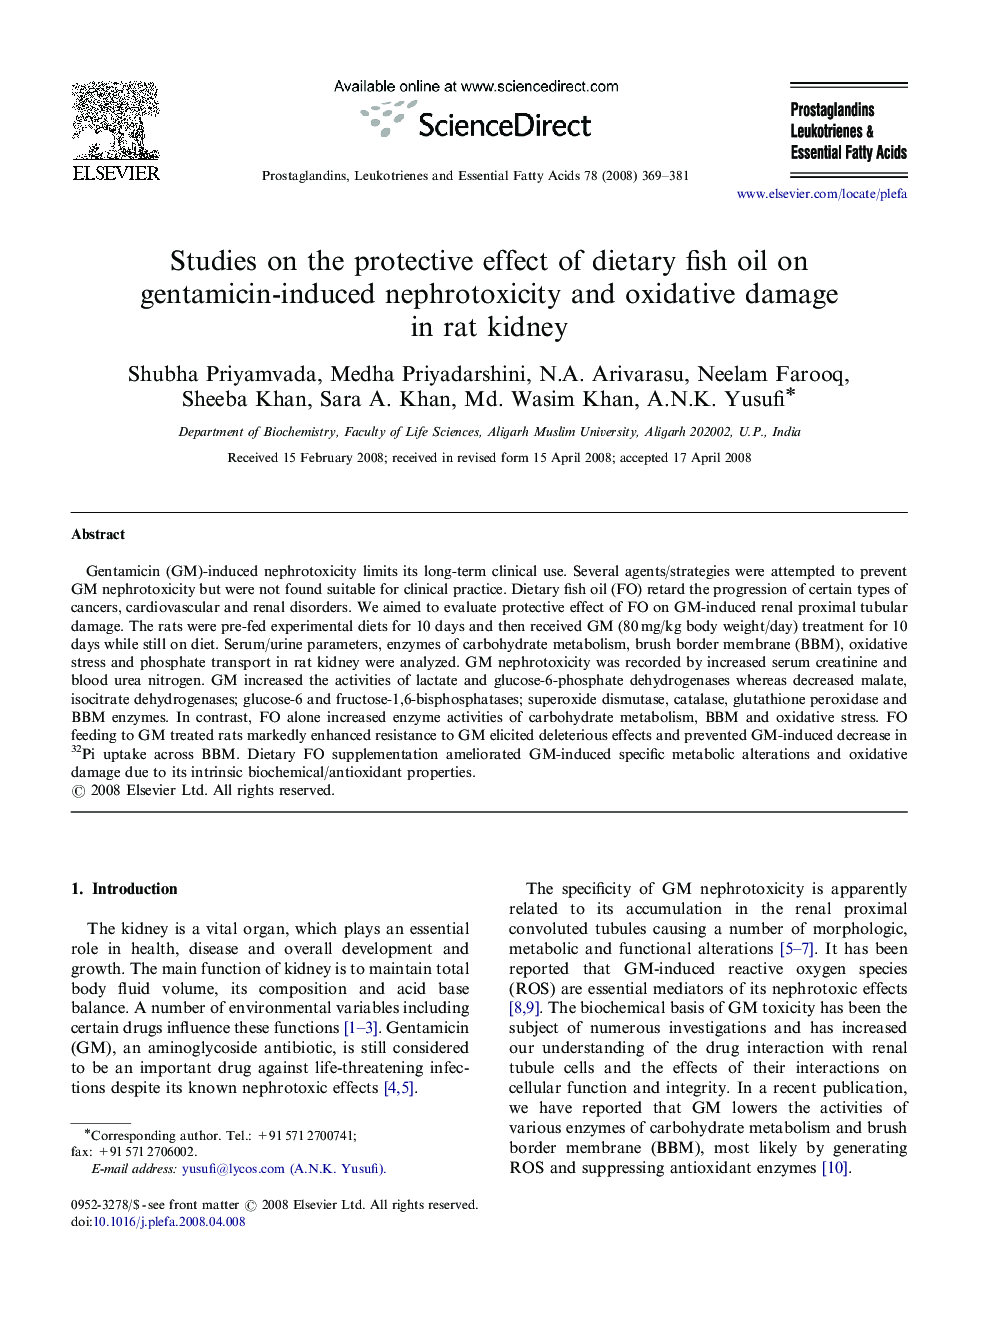 Studies on the protective effect of dietary fish oil on gentamicin-induced nephrotoxicity and oxidative damage in rat kidney